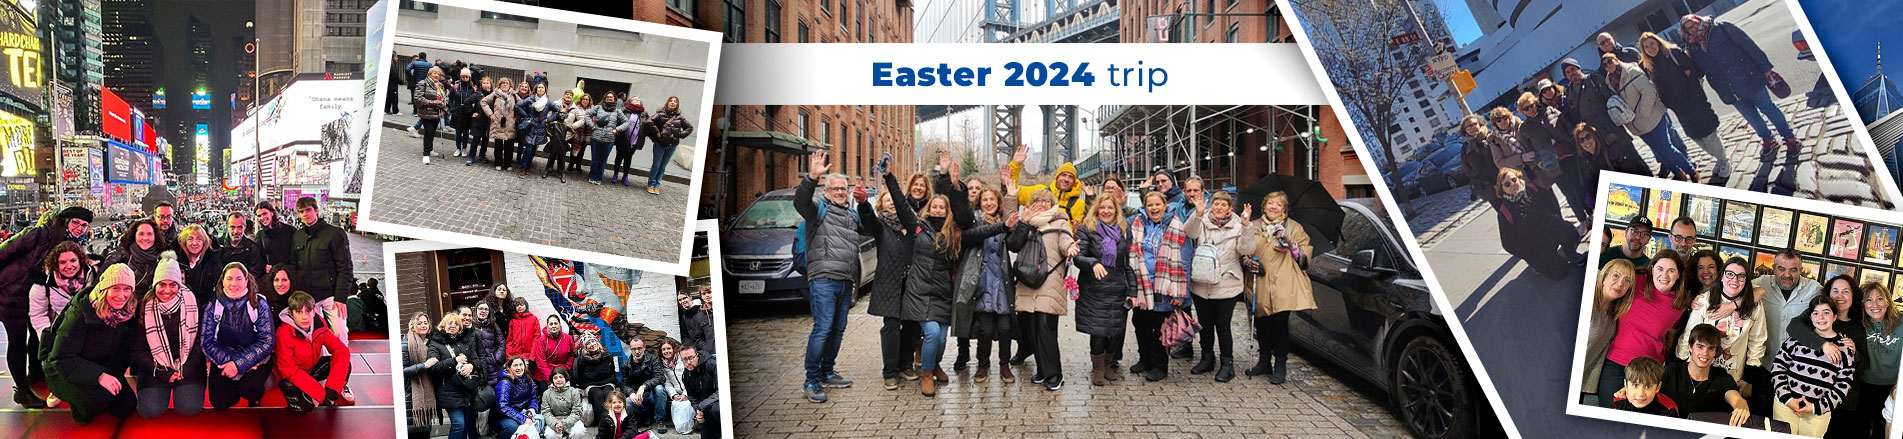 Trip to New York at Easter 2024 with Flight, Hotel & Guide